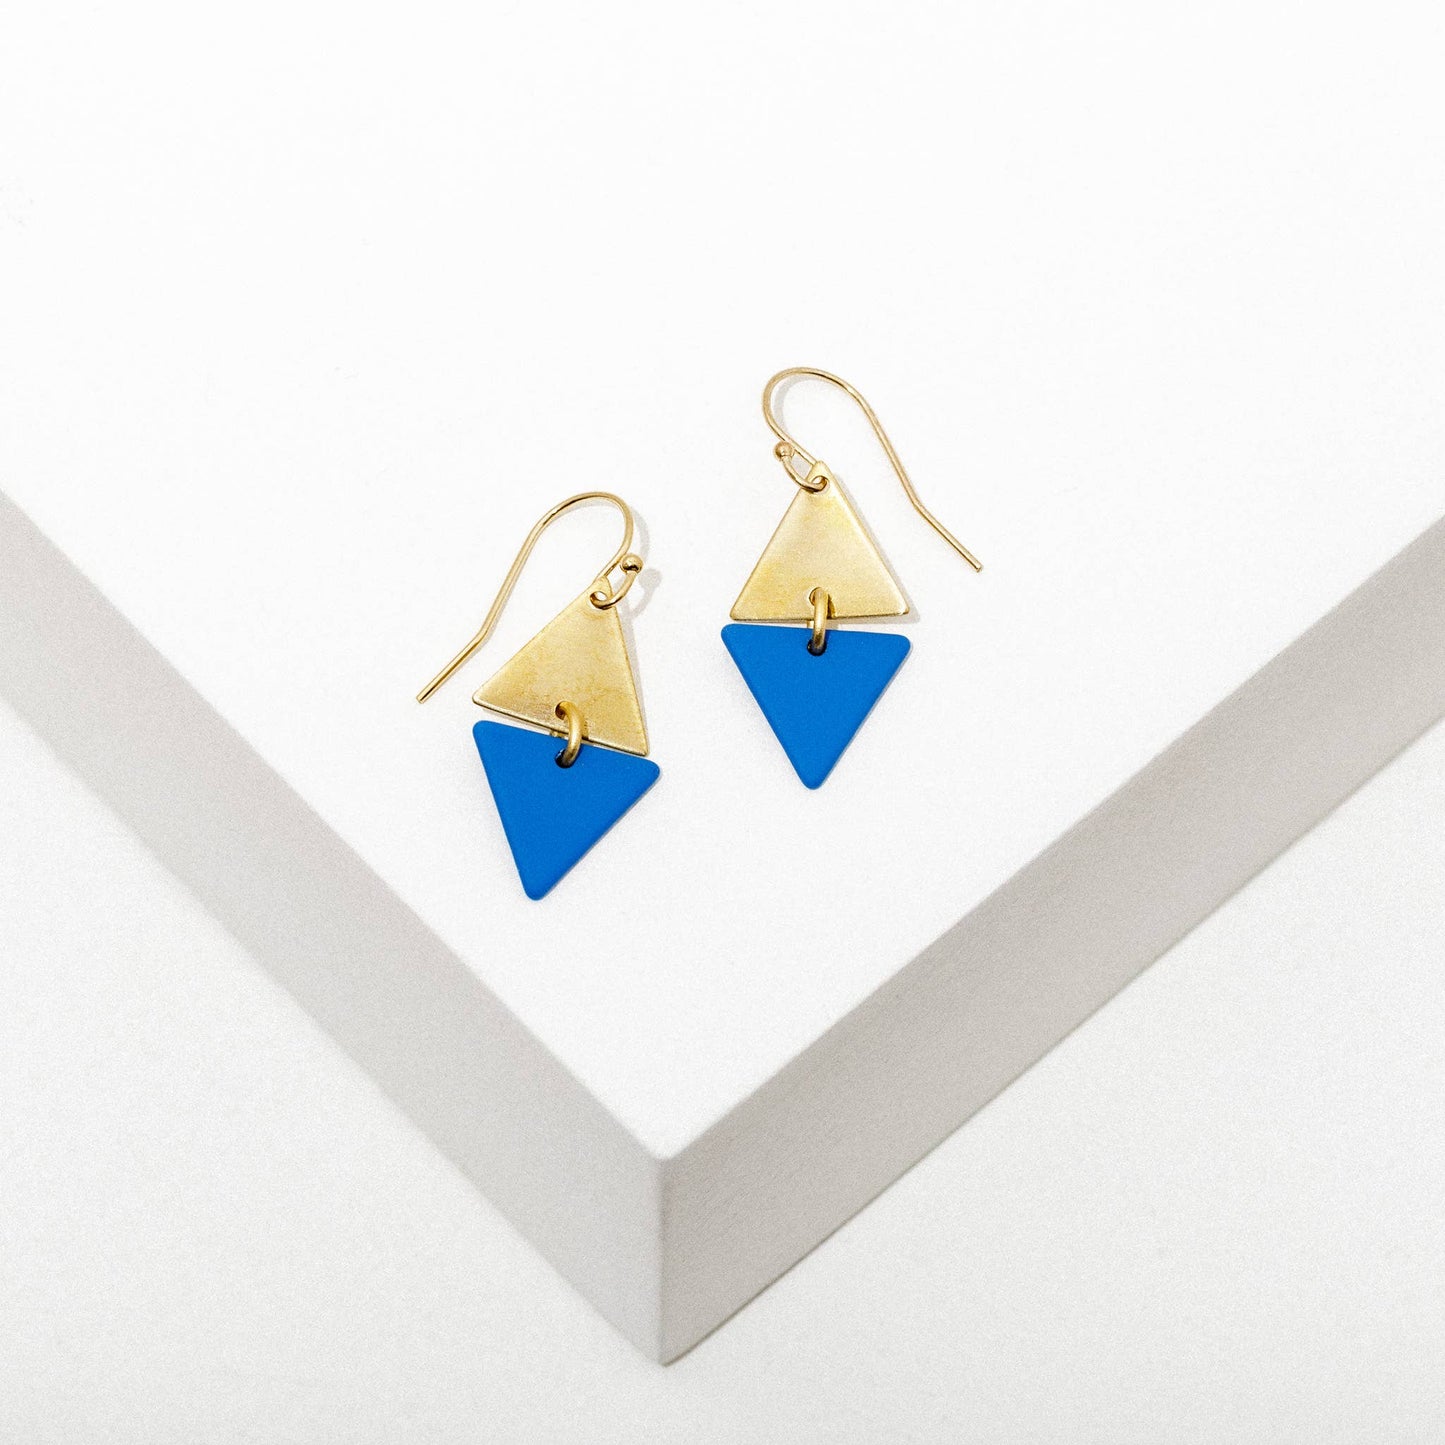 Larissa Loden - Alta Earrings  Larissa Loden   -better made easy-eco-friendly-sustainable-gifting